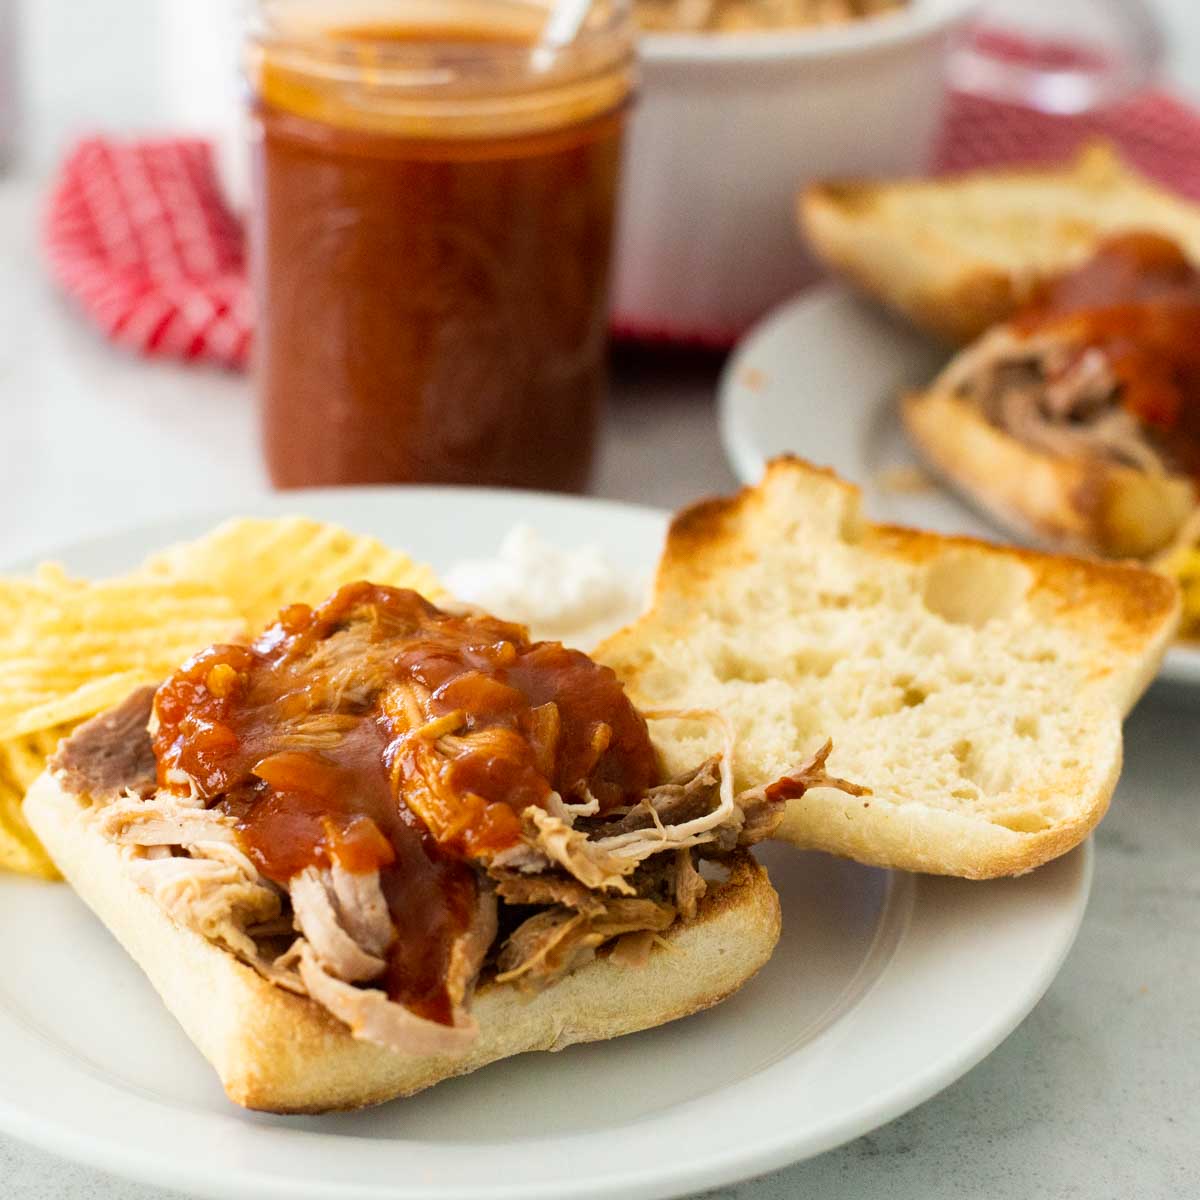 Pulled Pork Recipe (Slow Cooker or Oven Roasted) - The Food Charlatan